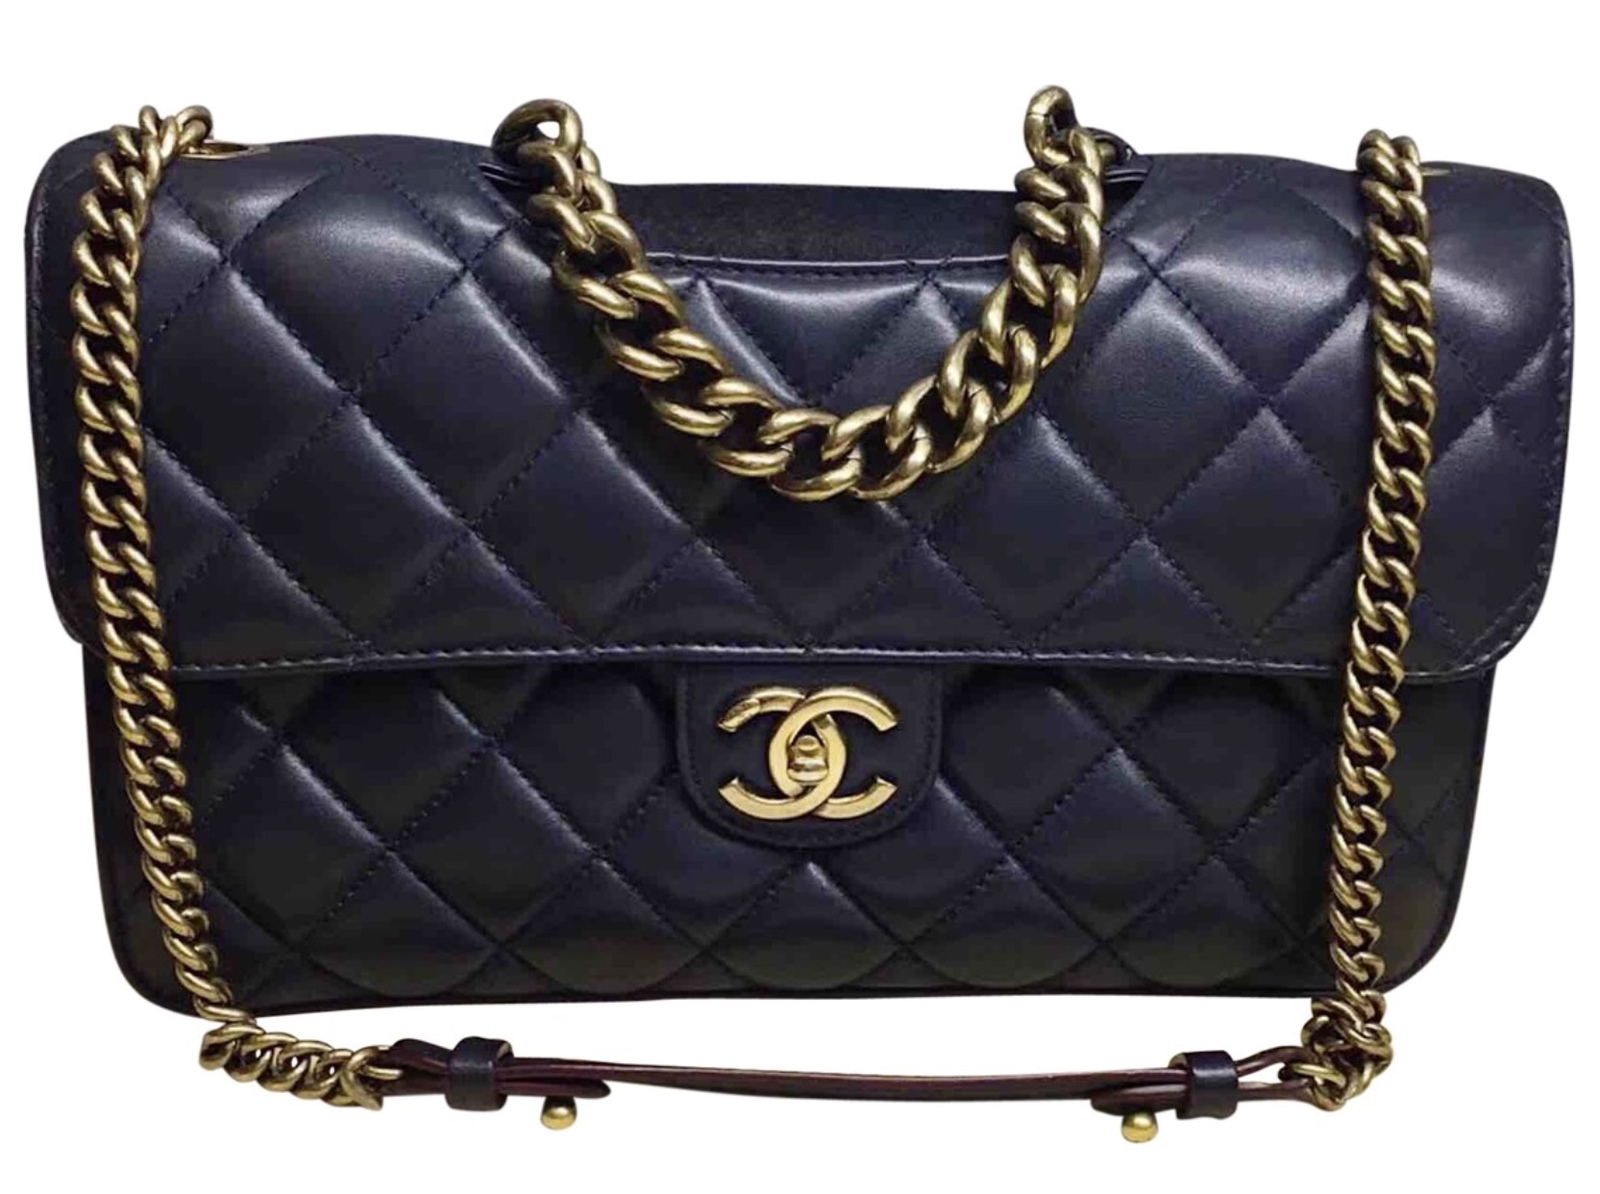 AUTHENTIC CHANEL RARE NAVY BLUE QUILTED LAMBSKIN LARGE PERFECT EDGE BAG  GOLD HW